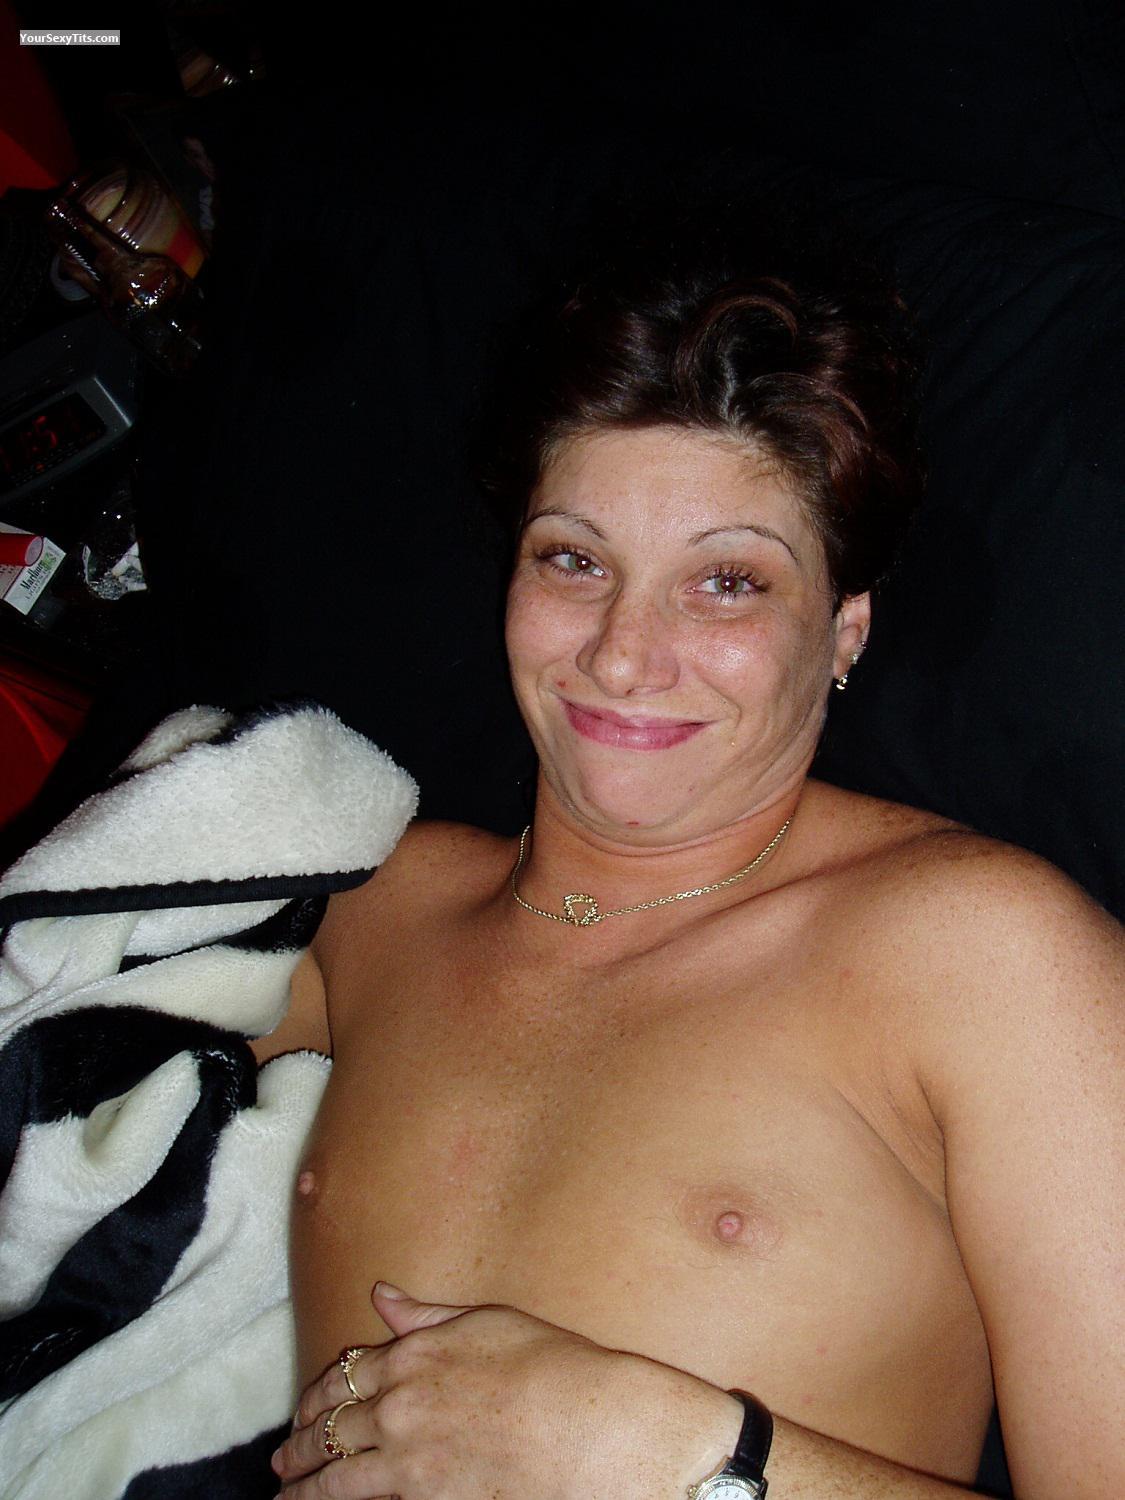 Tit Flash: Small Tits - Topless Dee from United States